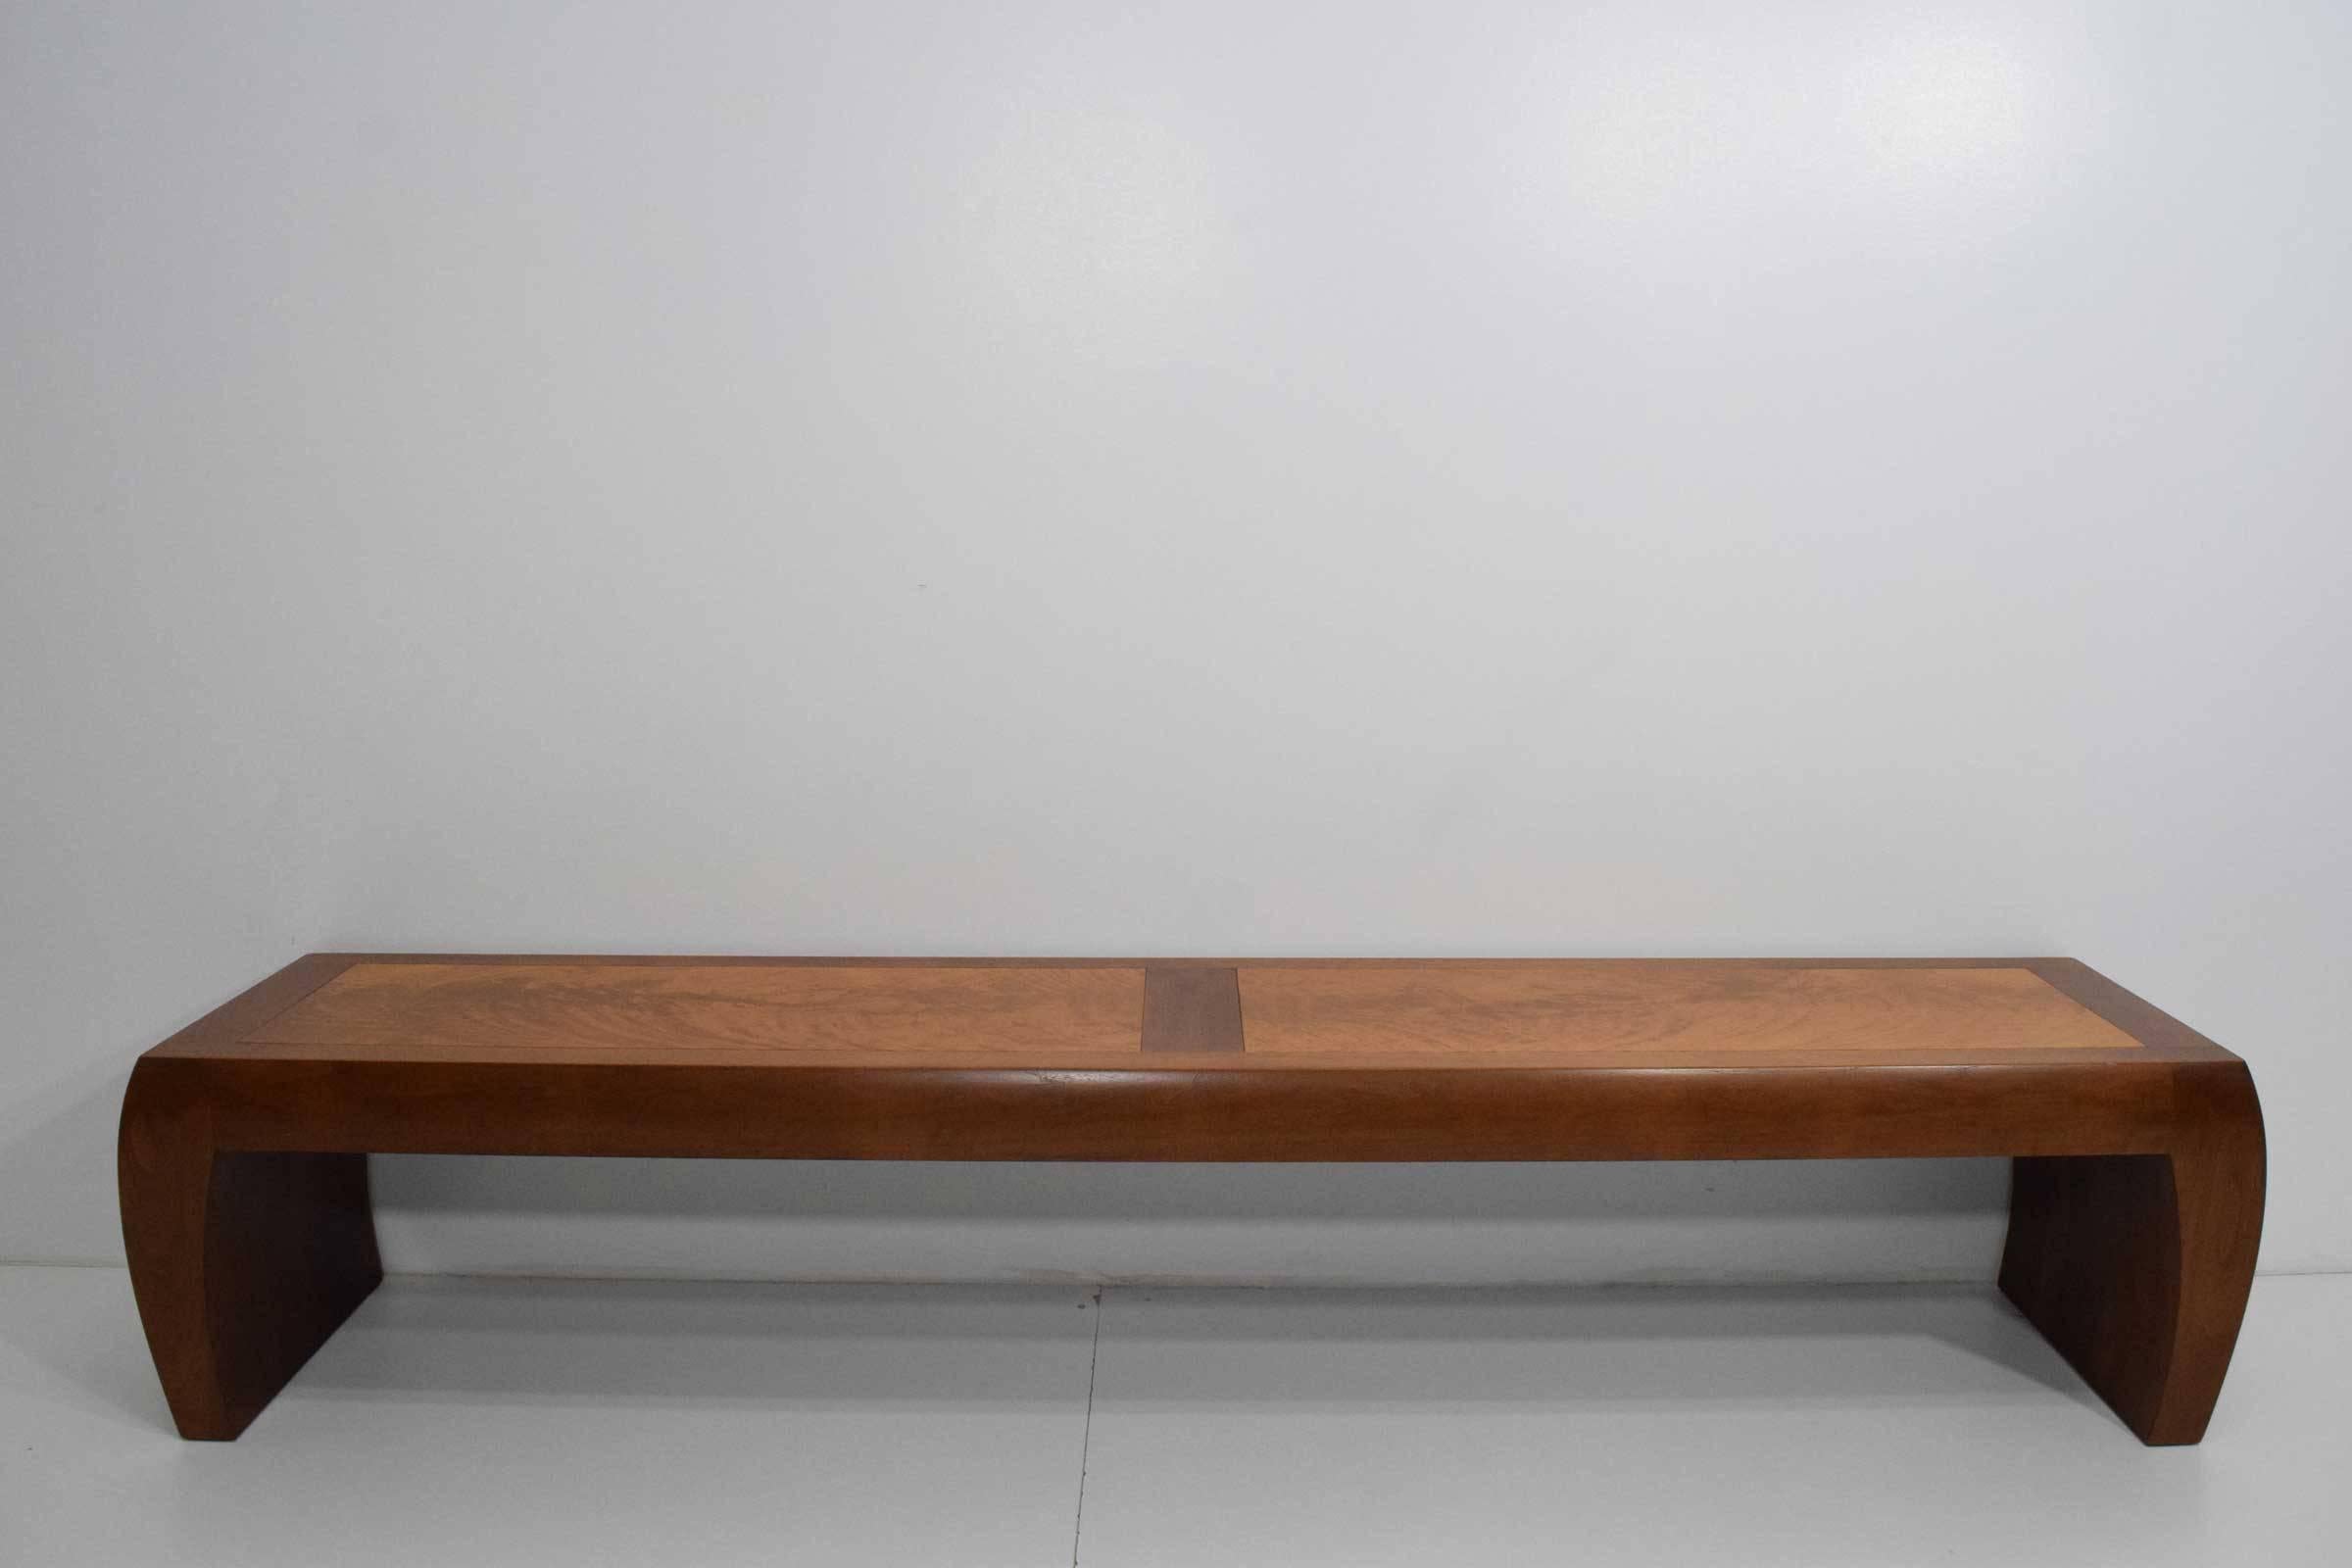 Long bench by Christian Liaigre for Holly Hunt. Stamped on underside. Beautiful bookmatched exotic wood pattern  on top, slightly curved legs. 